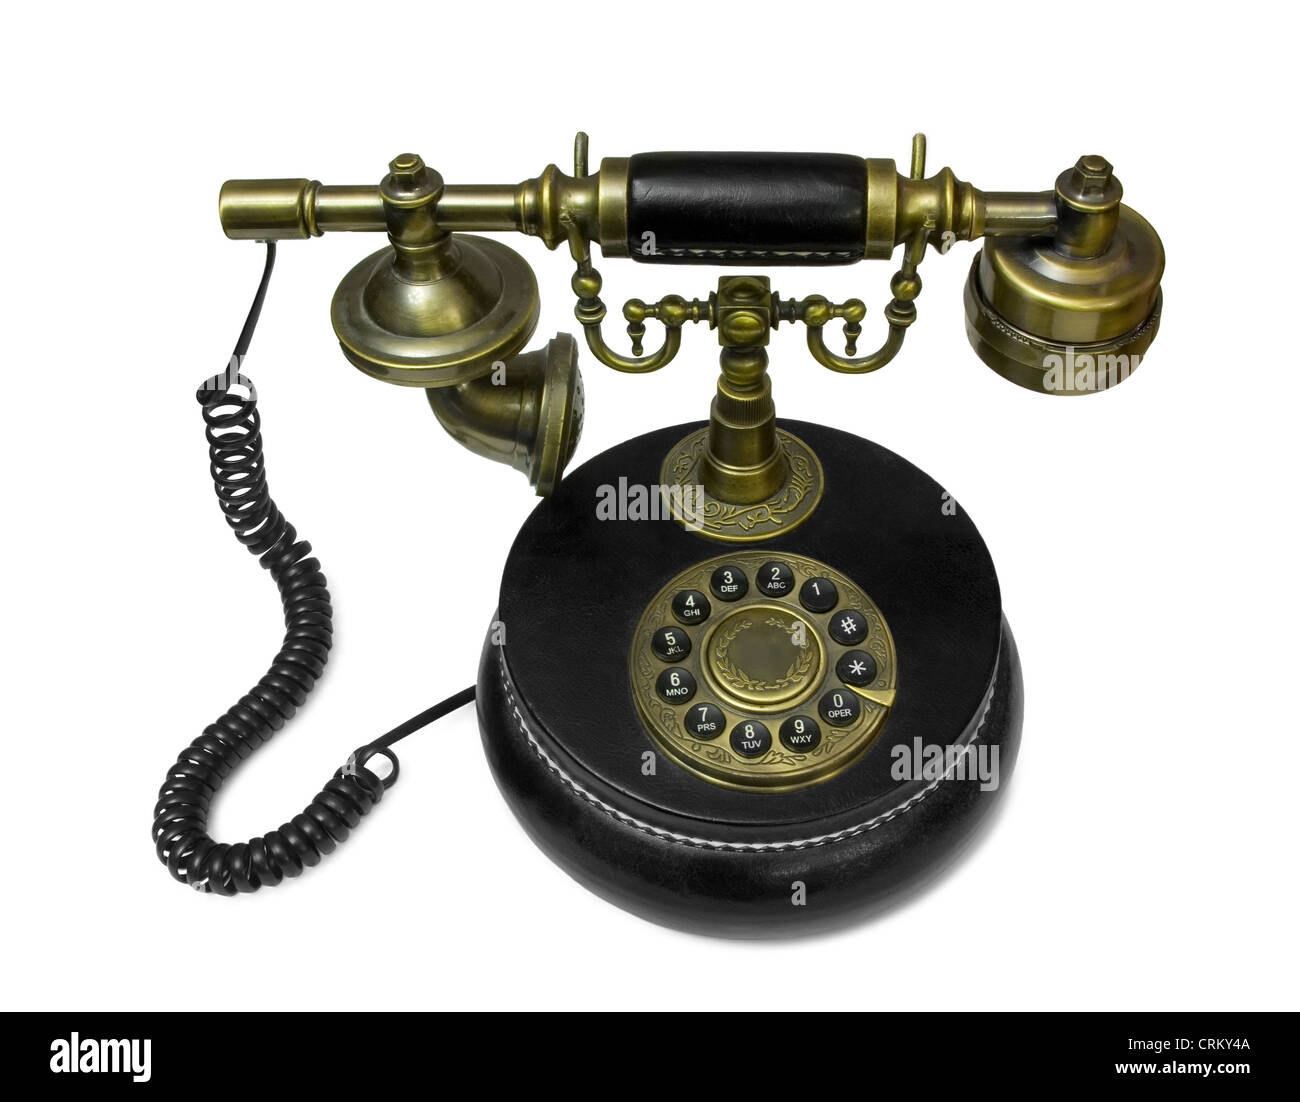 Old style telephone made of brass and leather isolated on white Stock Photo